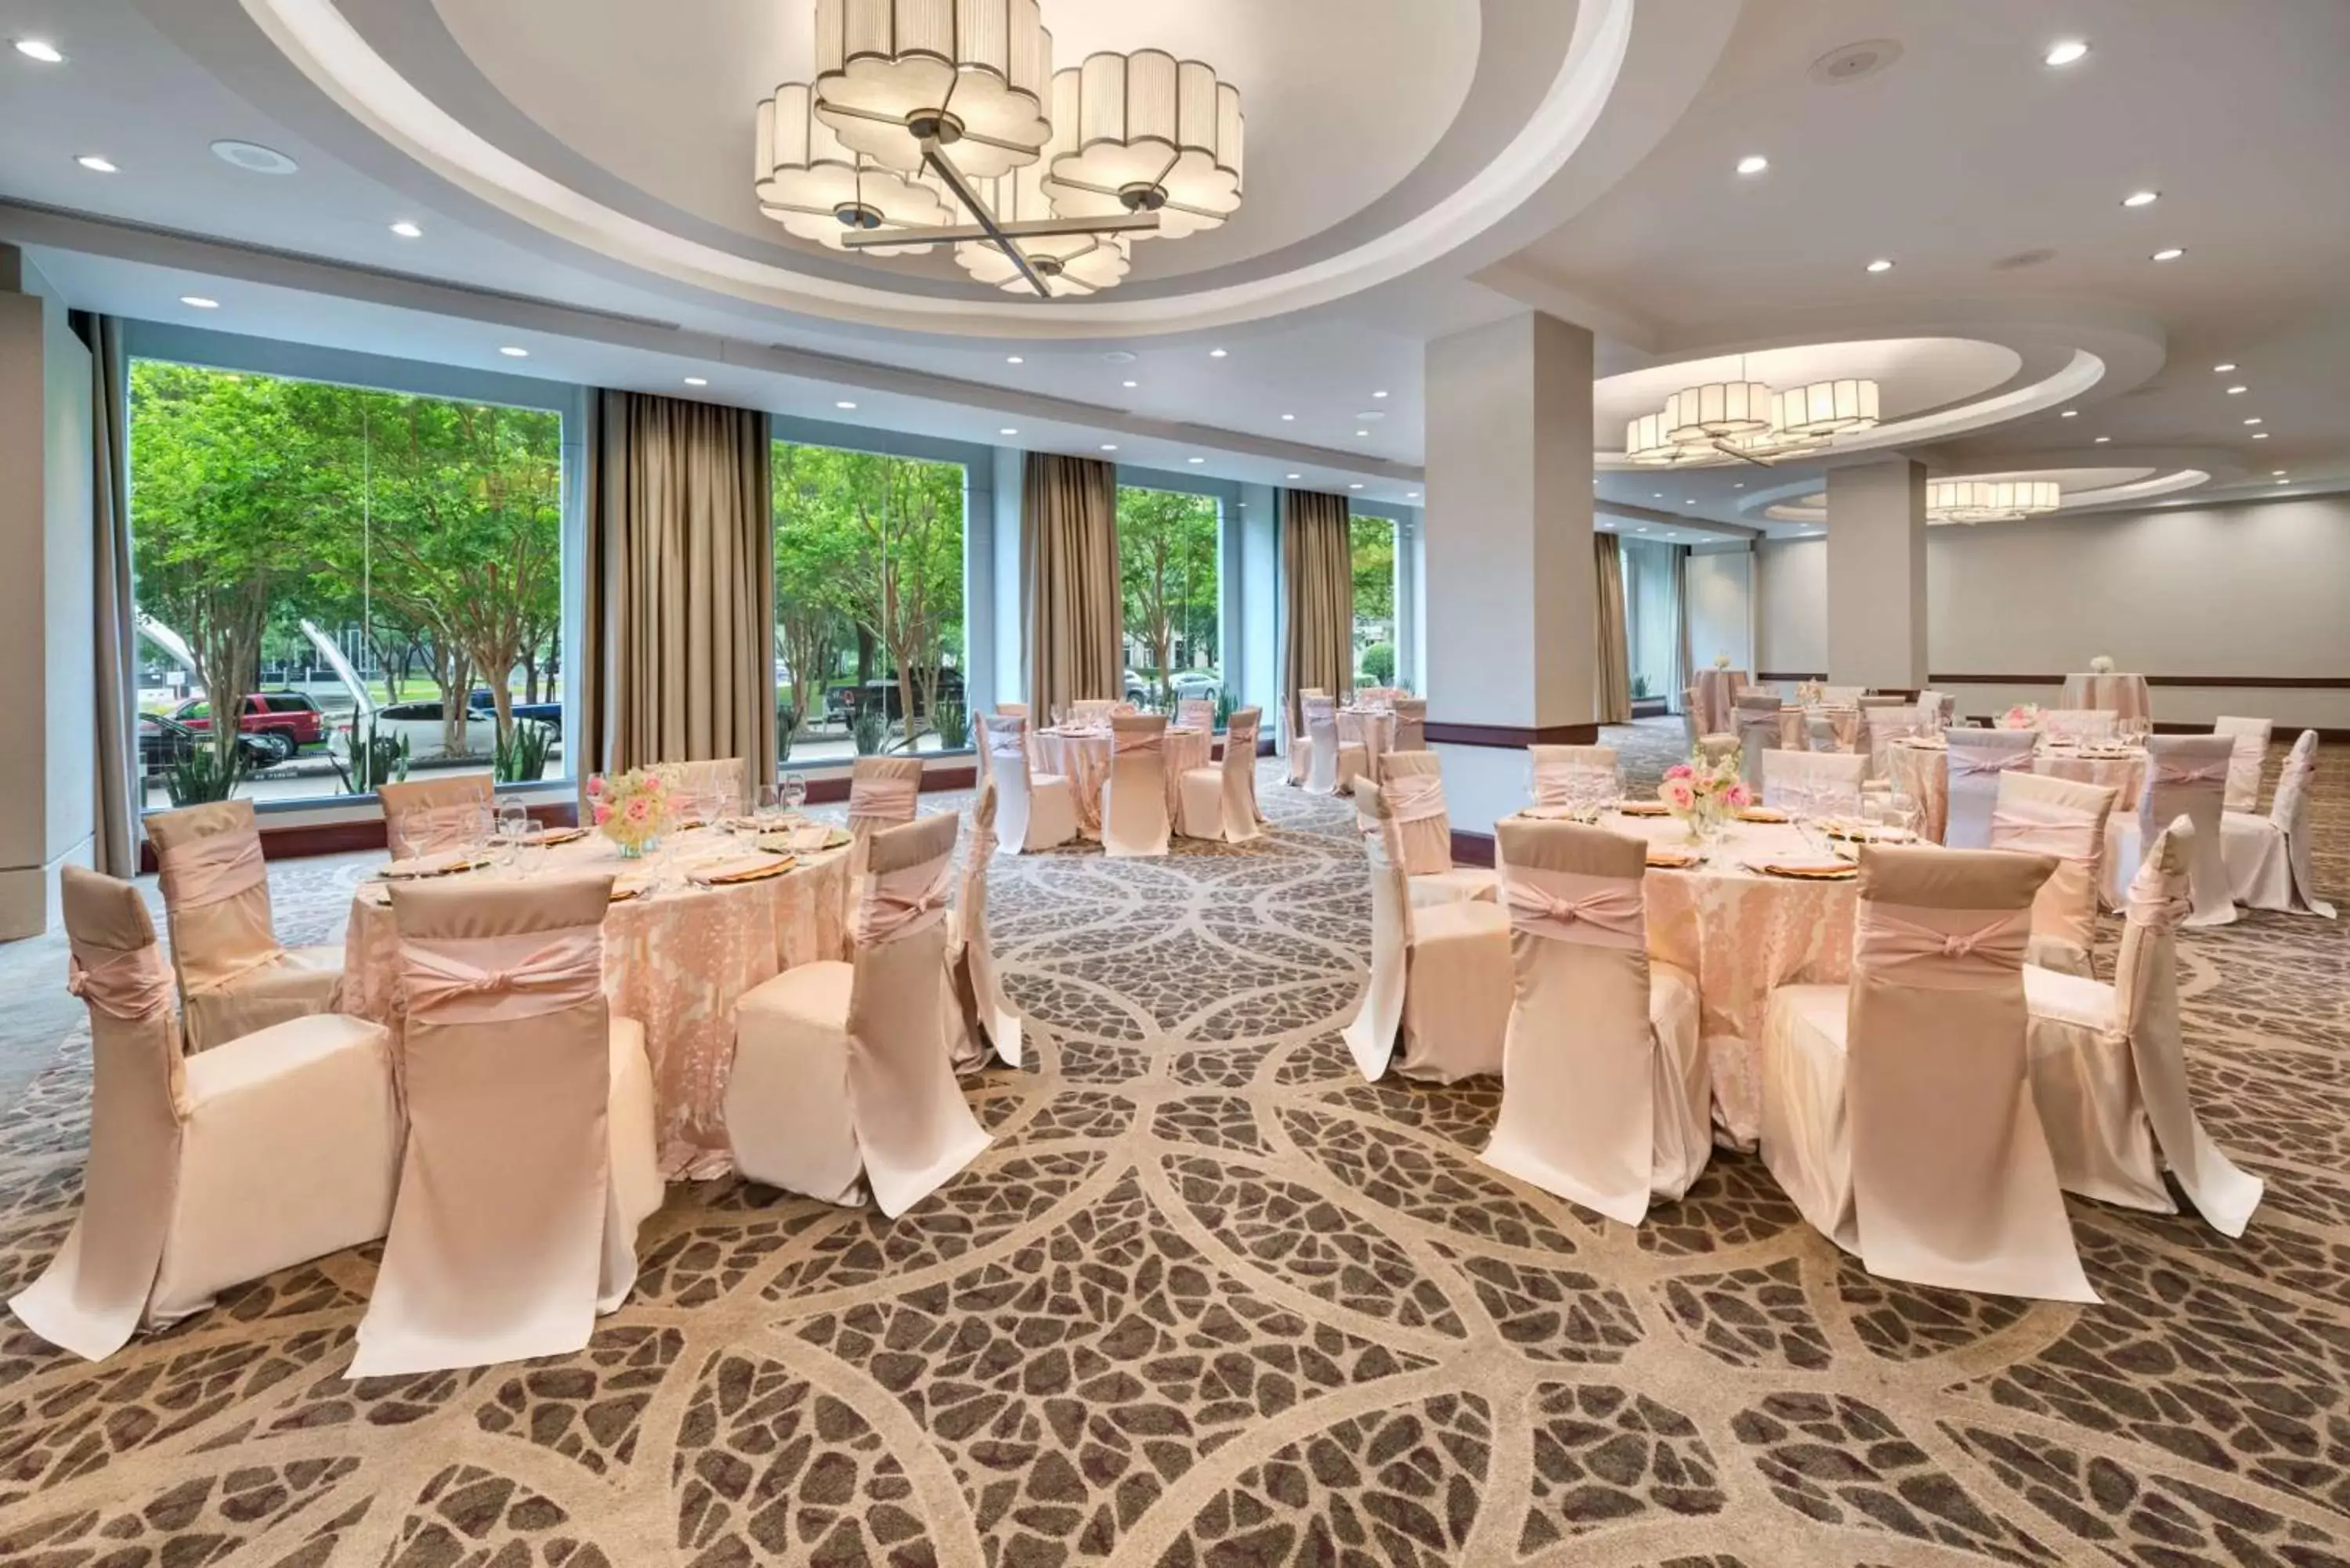 Meeting/conference room, Banquet Facilities in Hilton Houston Post Oak by the Galleria